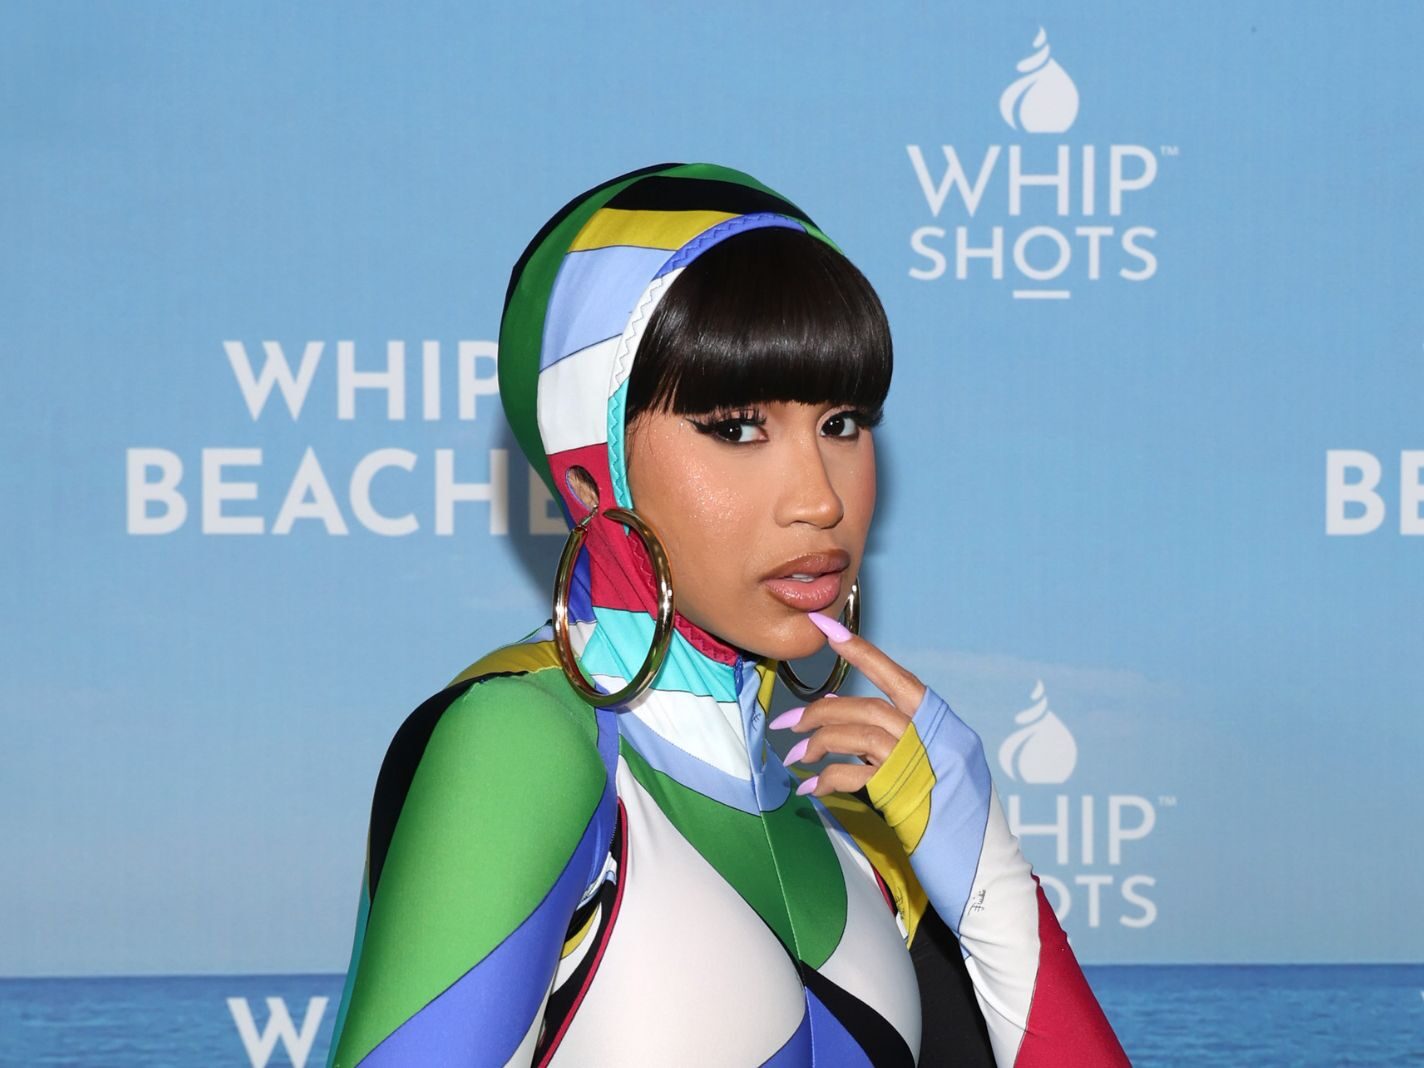 Cardi B's Whipshots Is Now Available in These 37 States